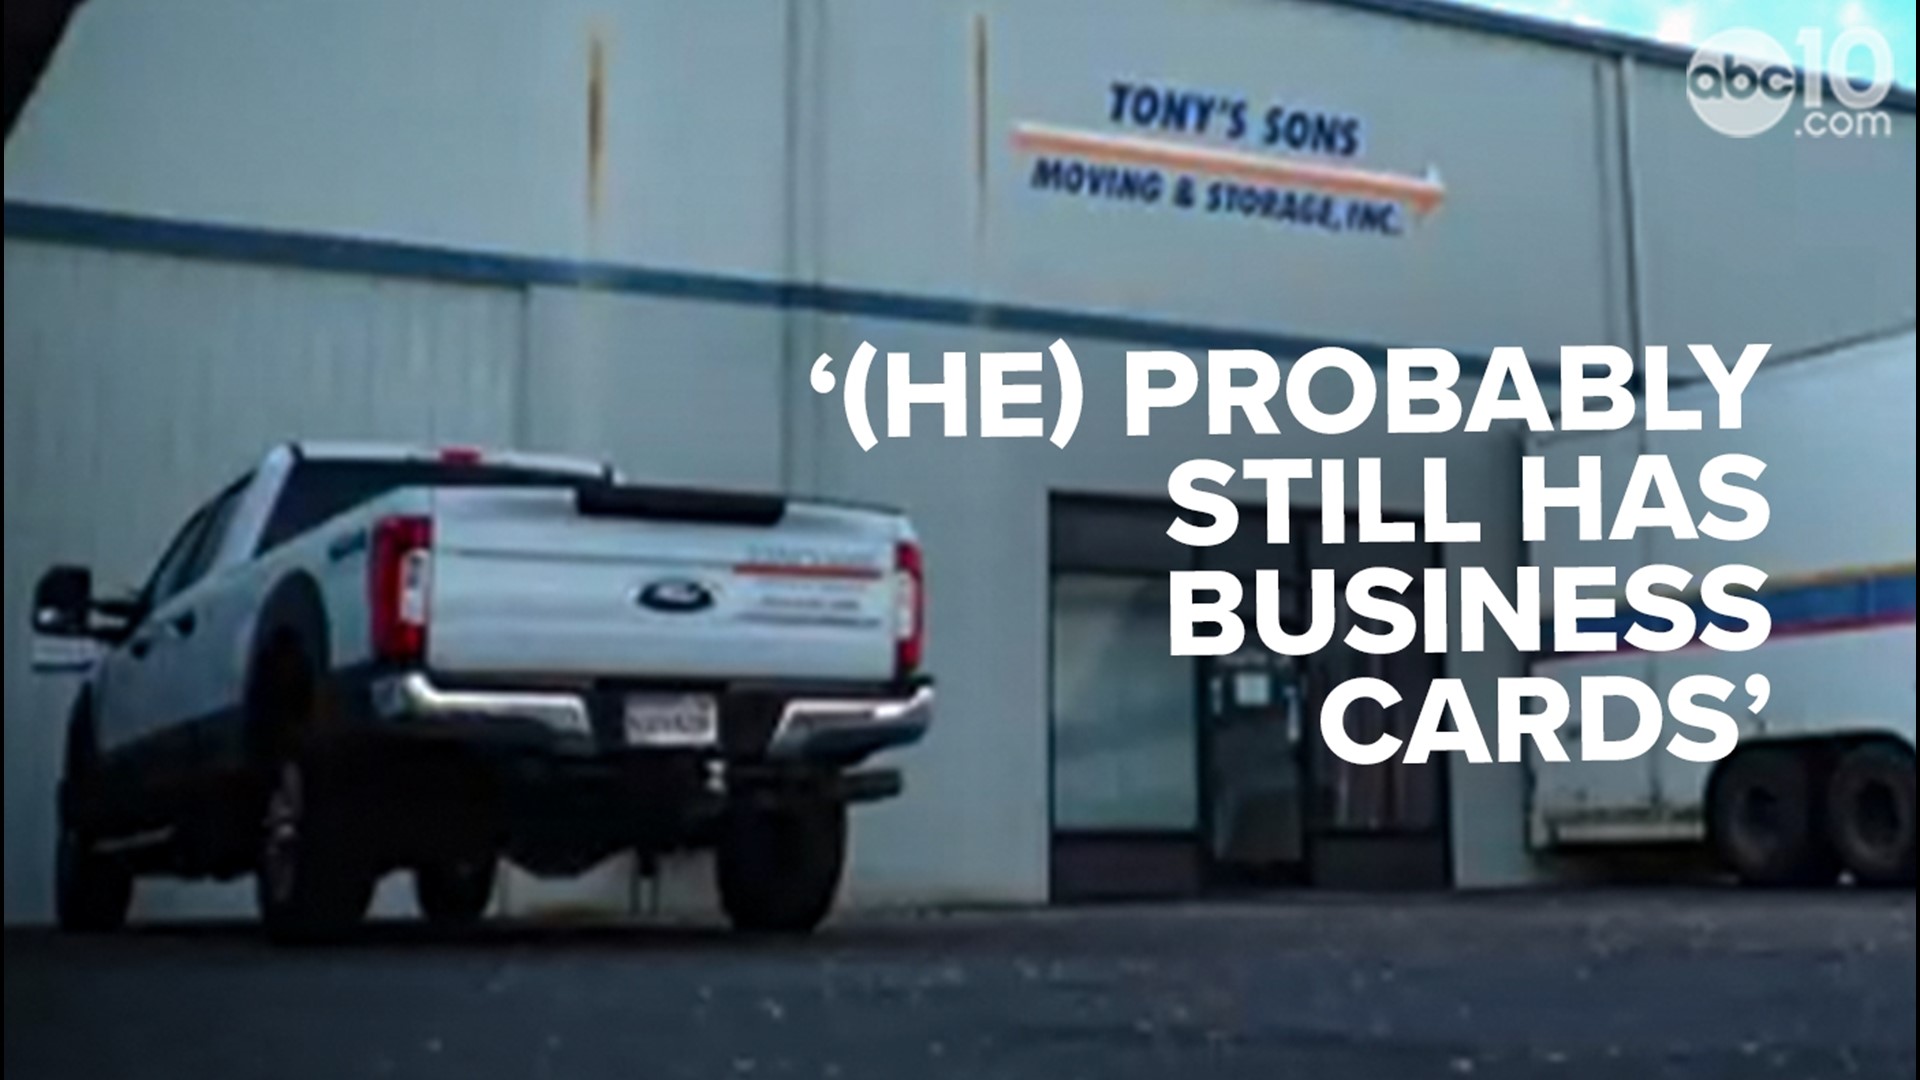 The company owner said he’s received calls from "customers," who are wondering where their belongings are after doing business with one of his now former employees